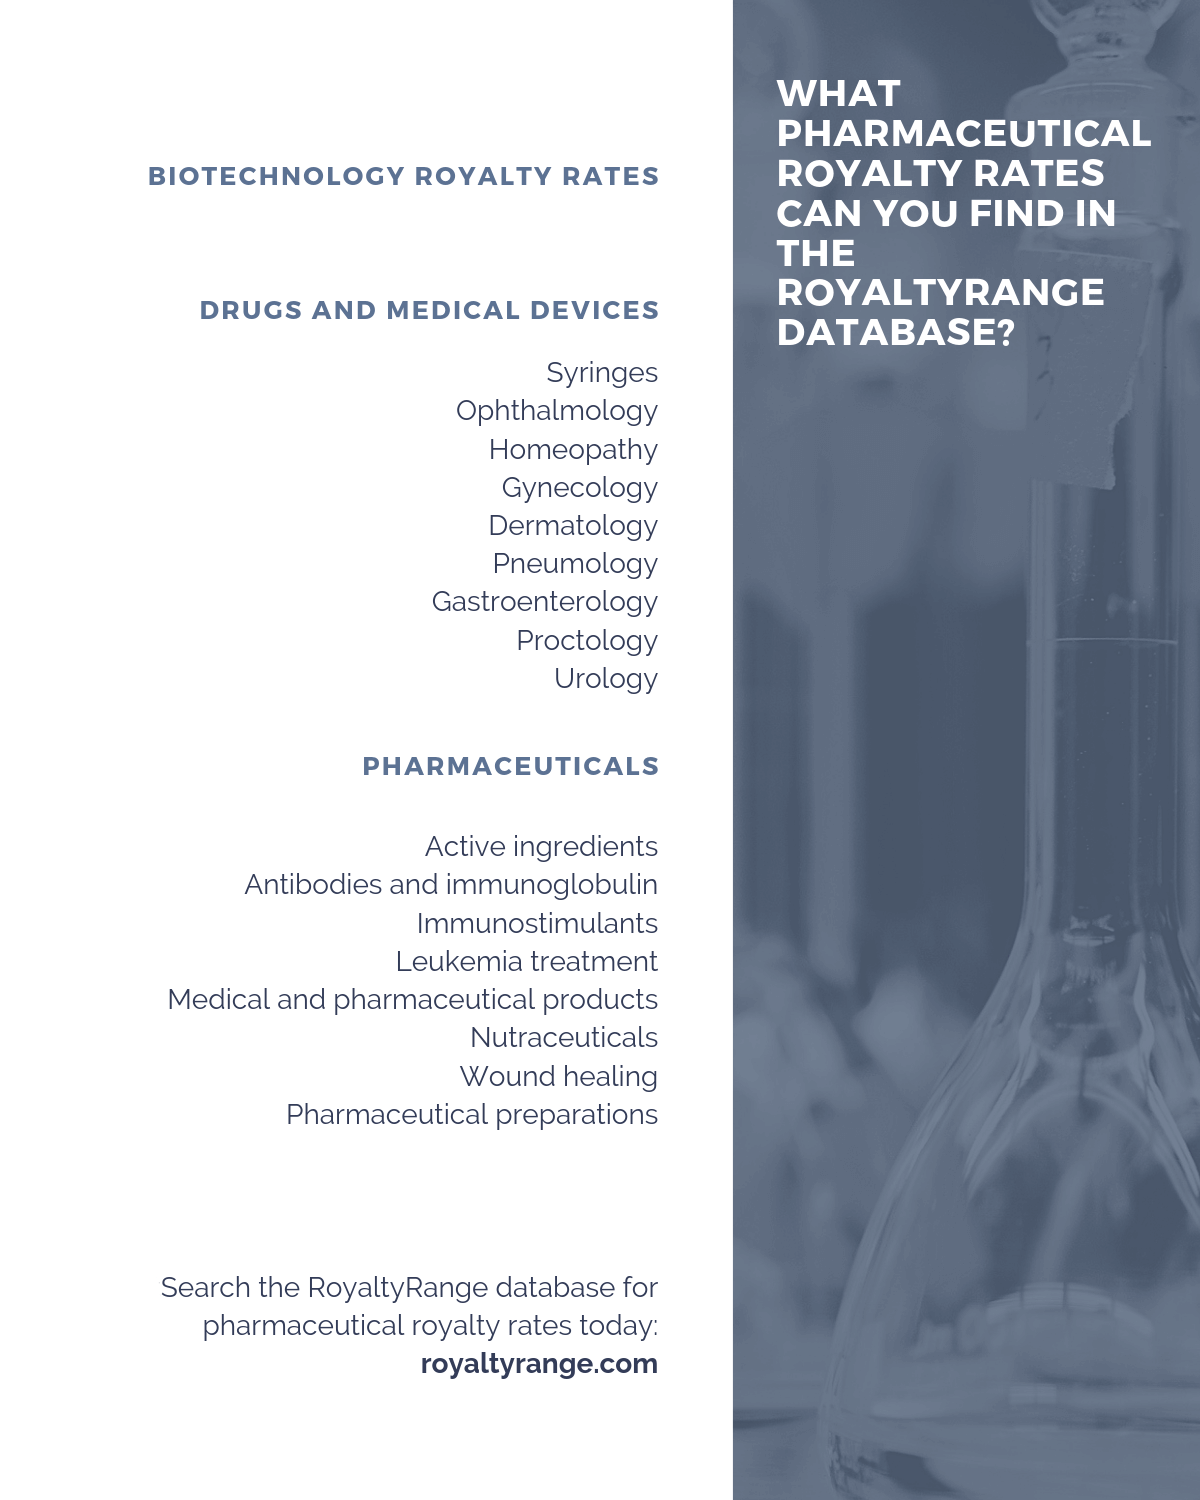 What pharmaceutical royalty rates can you find in the RoyaltyRange database